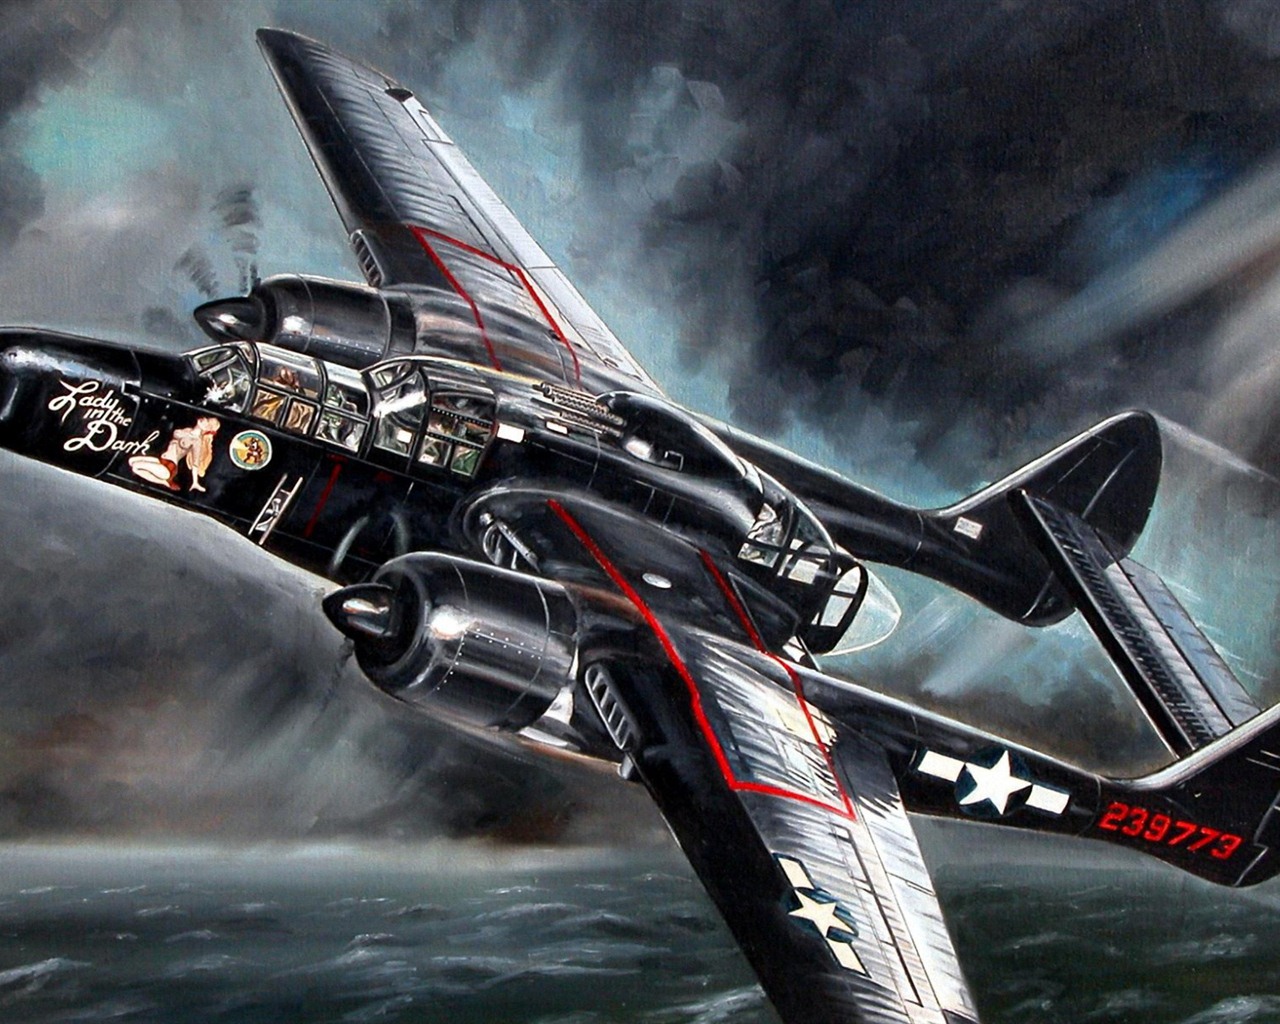 Military aircraft flight exquisite painting wallpapers #10 - 1280x1024